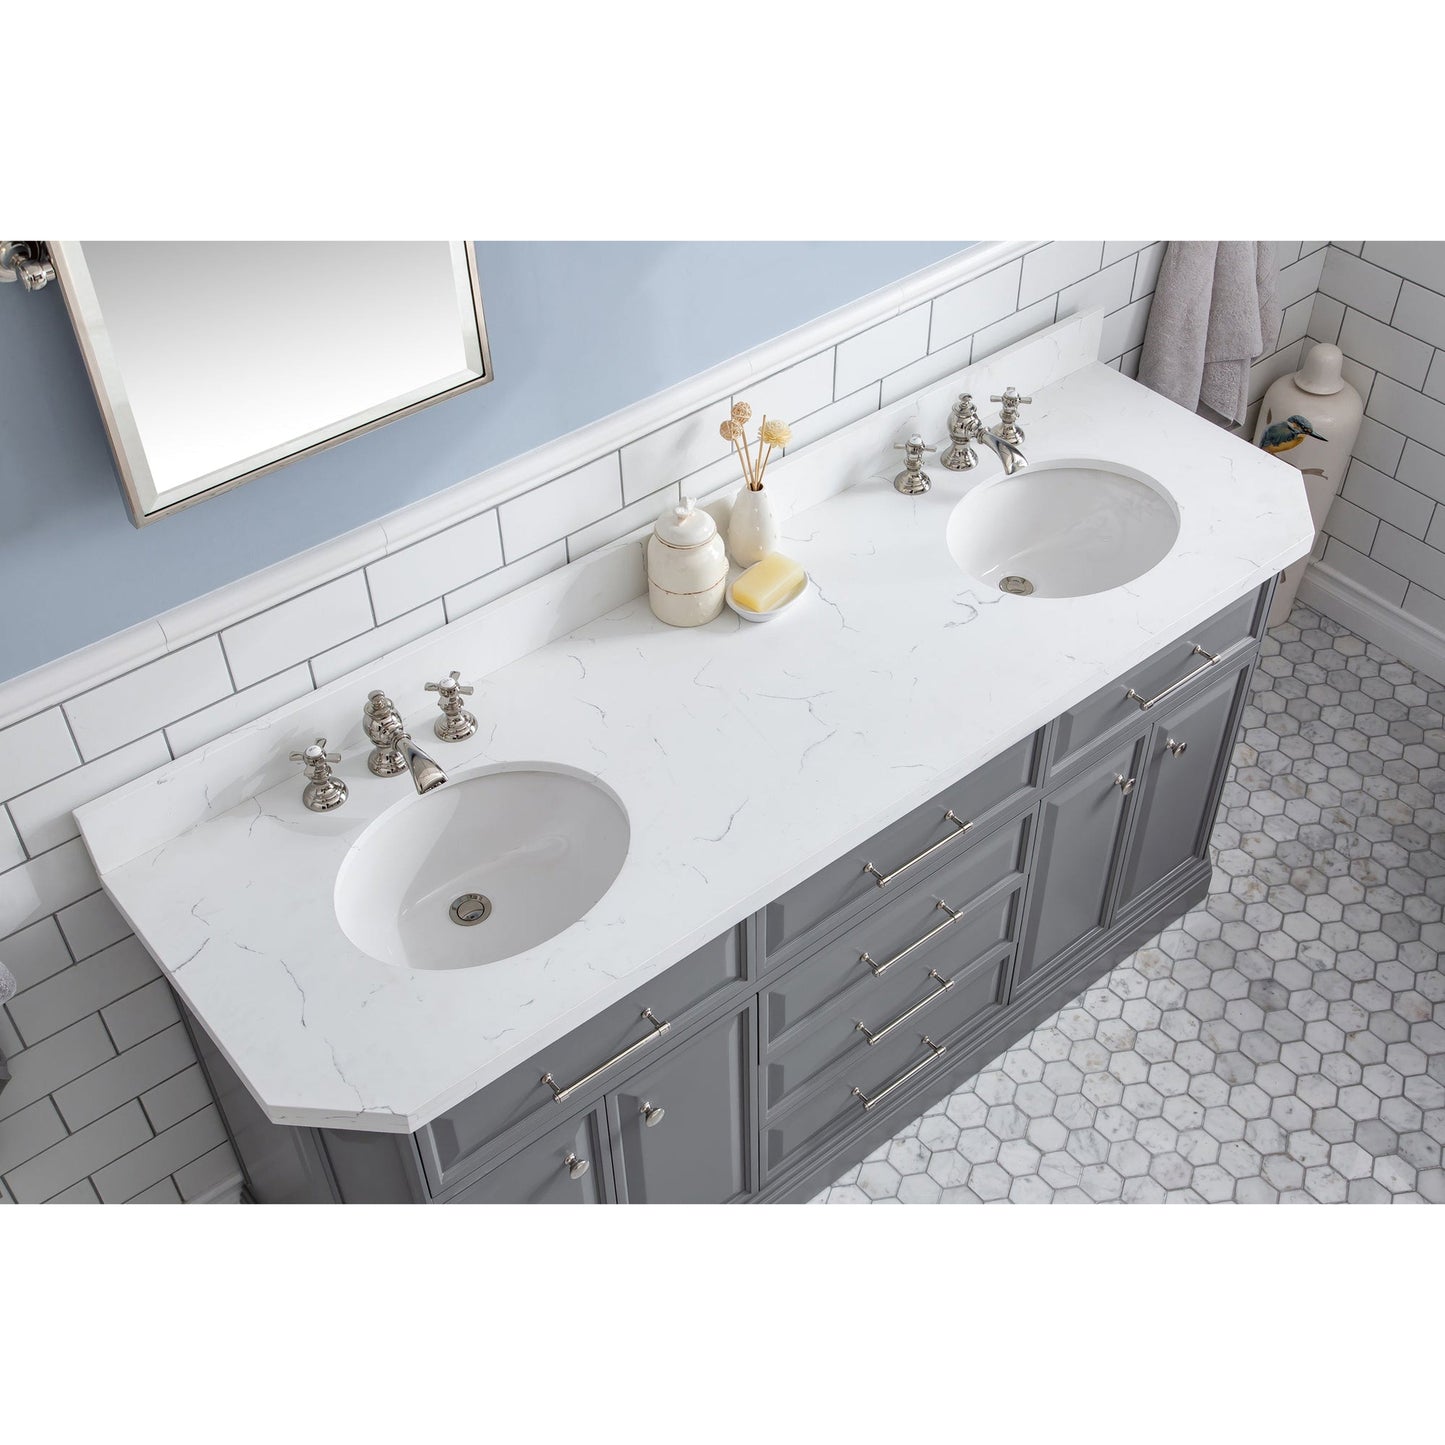 Water Creation Palace 72" Quartz Carrara Cashmere Grey Bathroom Vanity Set With Hardware And F2-0013 Faucets in Polished Nickel (PVD) Finish